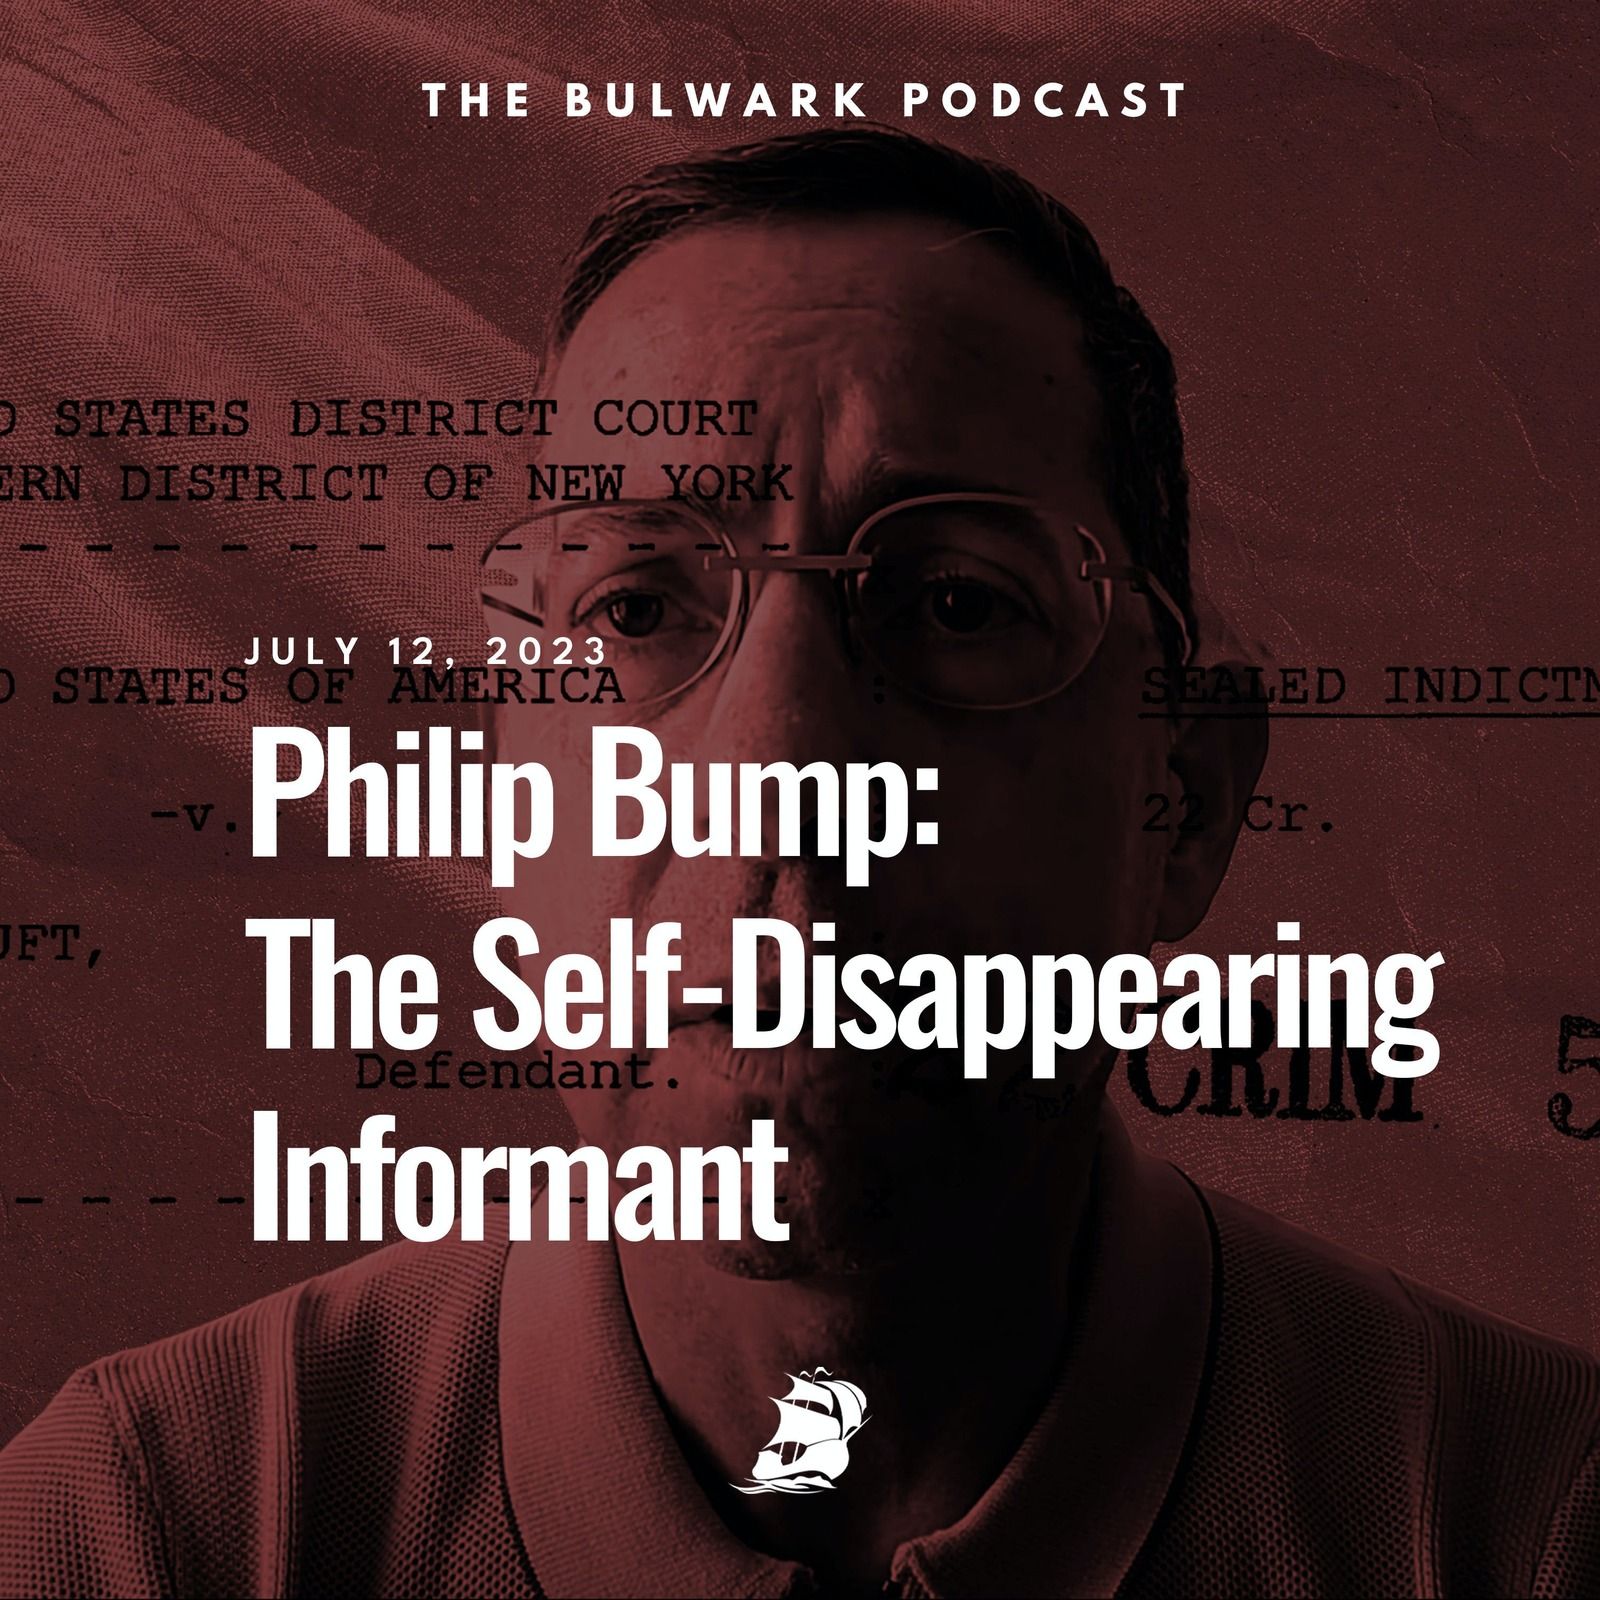 Philip Bump: The Self-Disappearing Informant by The Bulwark Podcast